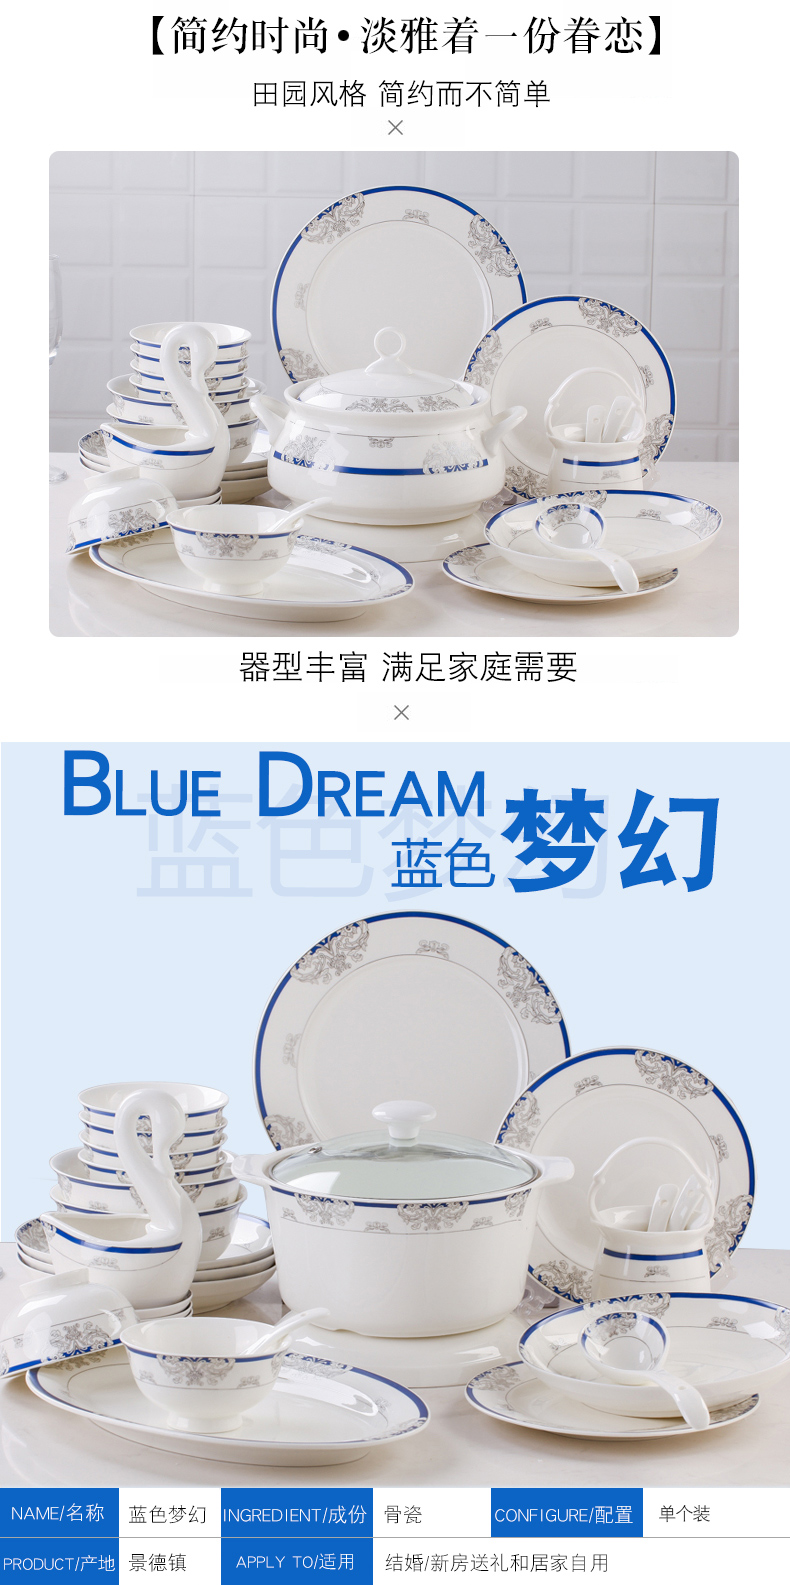 Blue dream free combination of DIY silverware 】 suit your job rainbow such as bowl dish fish dish soup spoon household ipads China